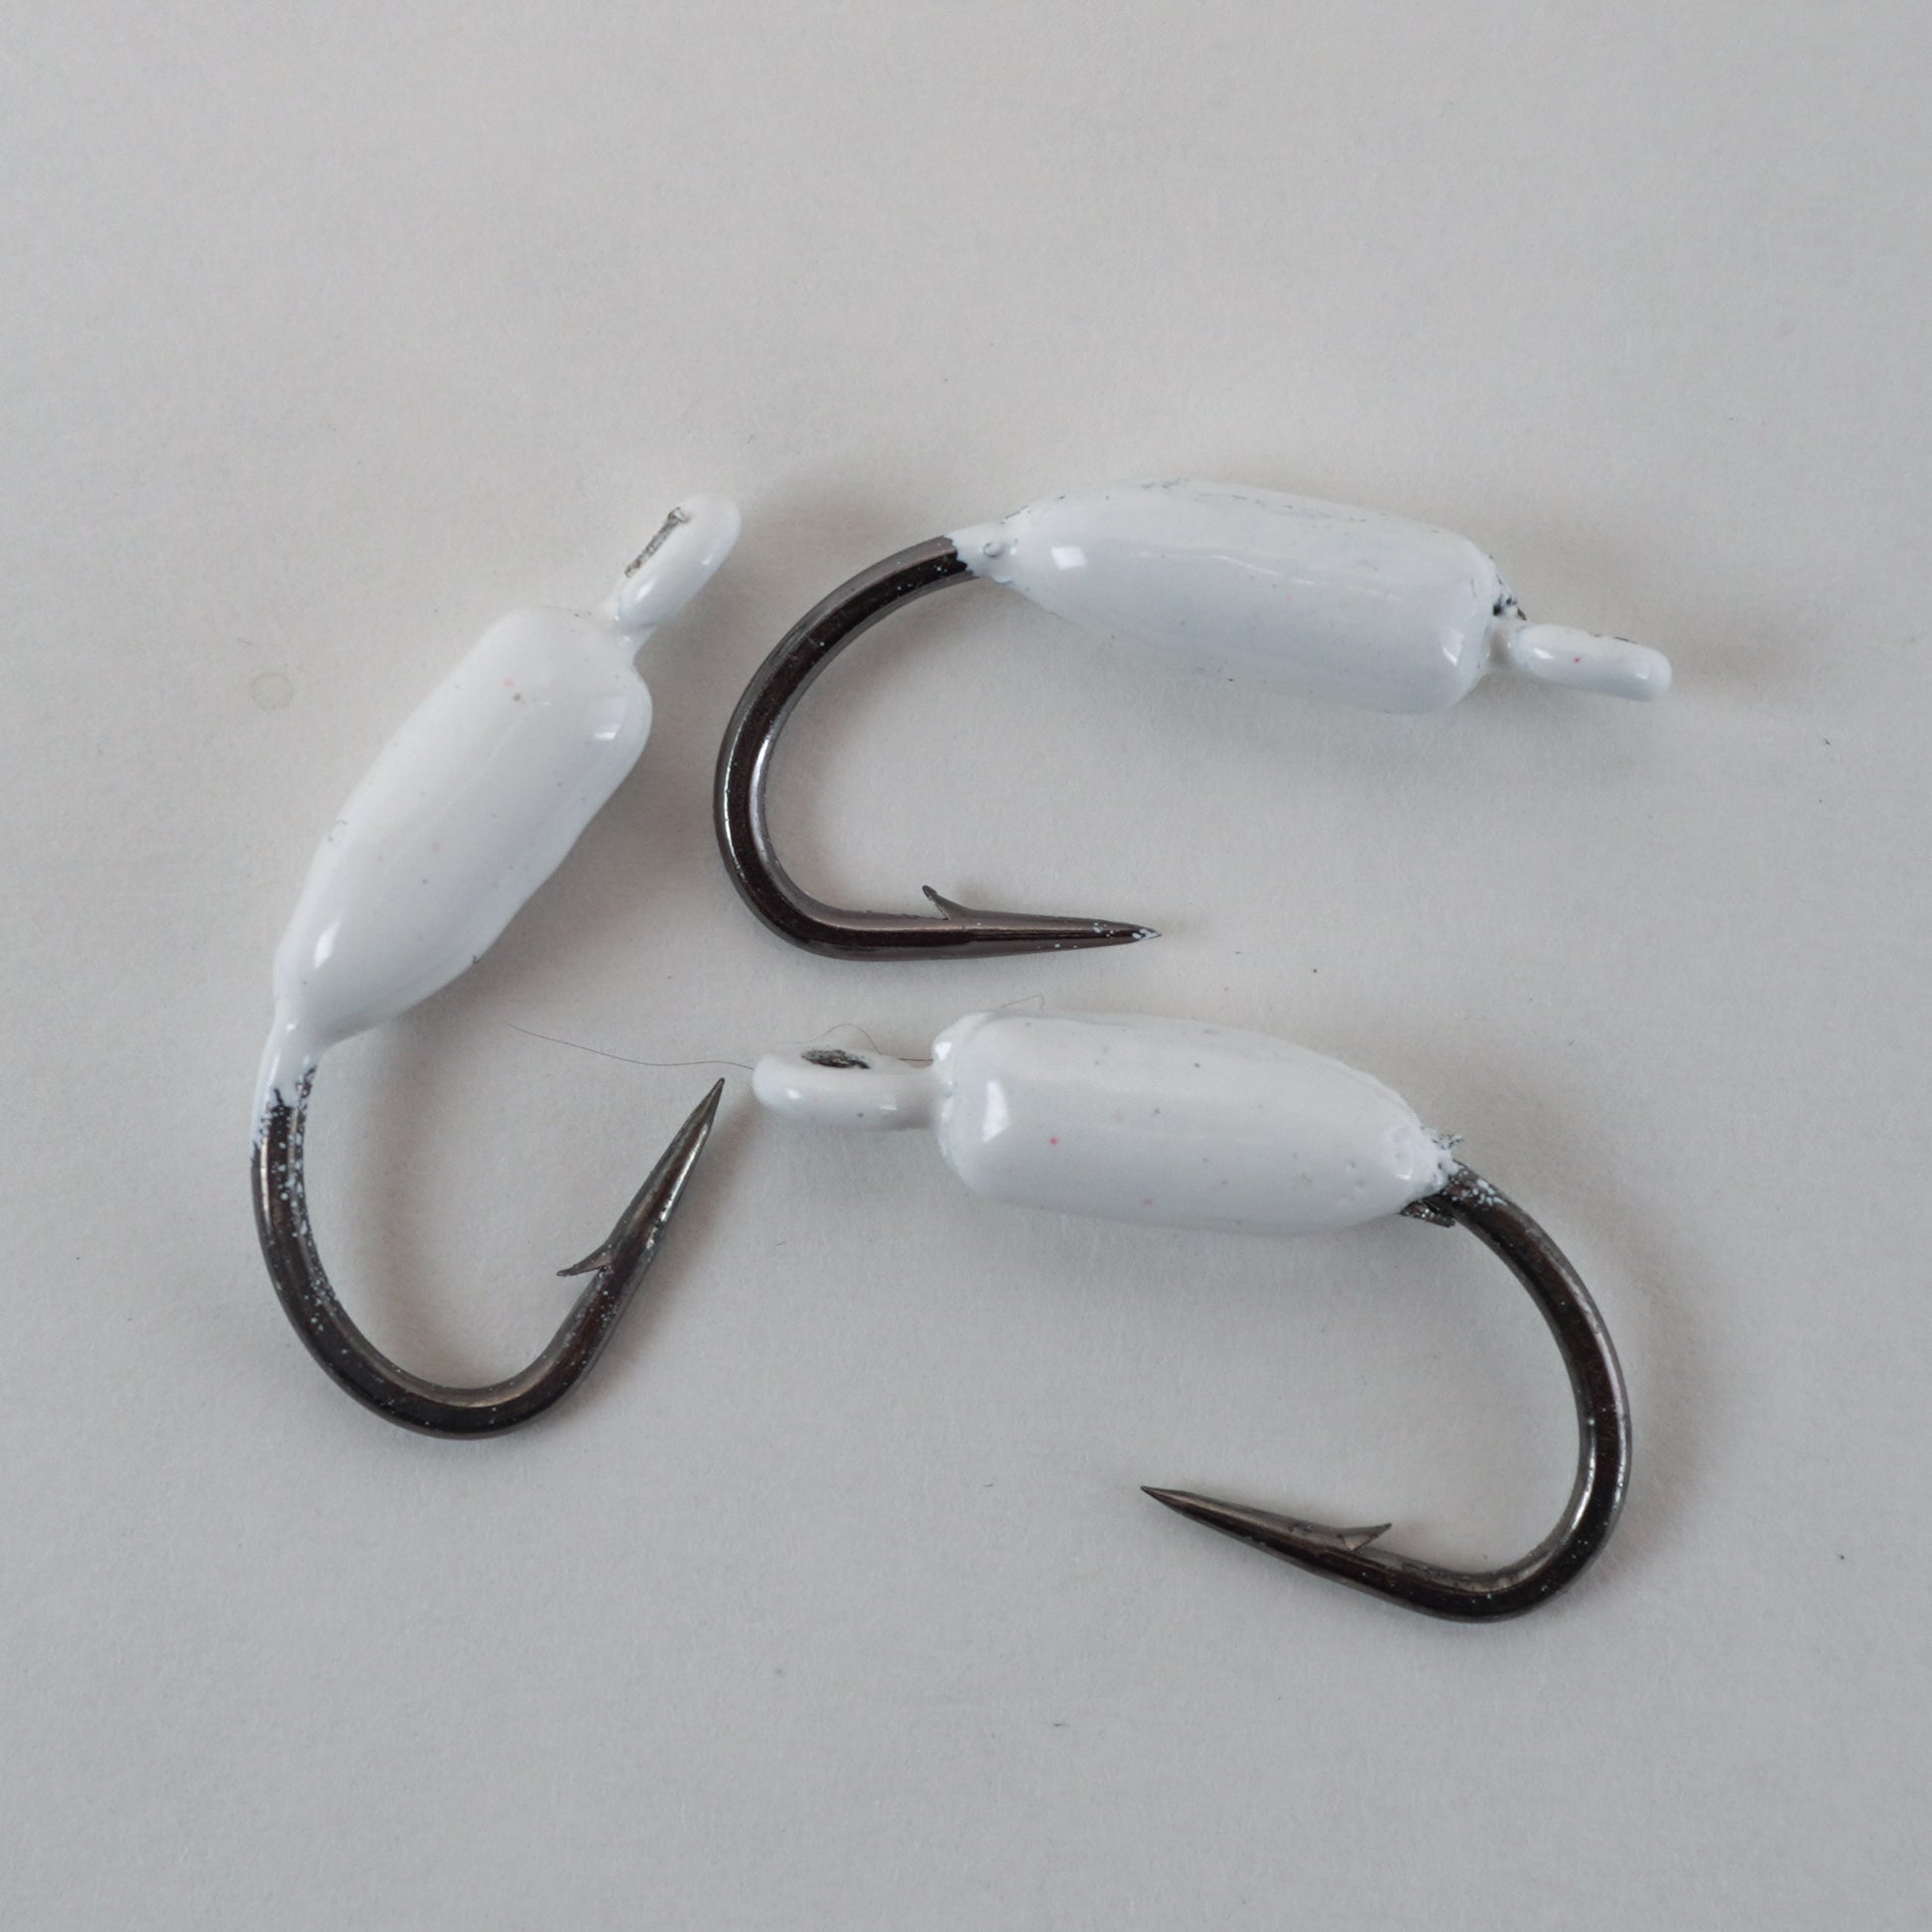 Top 2 Weedless Weighted Hooks For Inshore Fishing